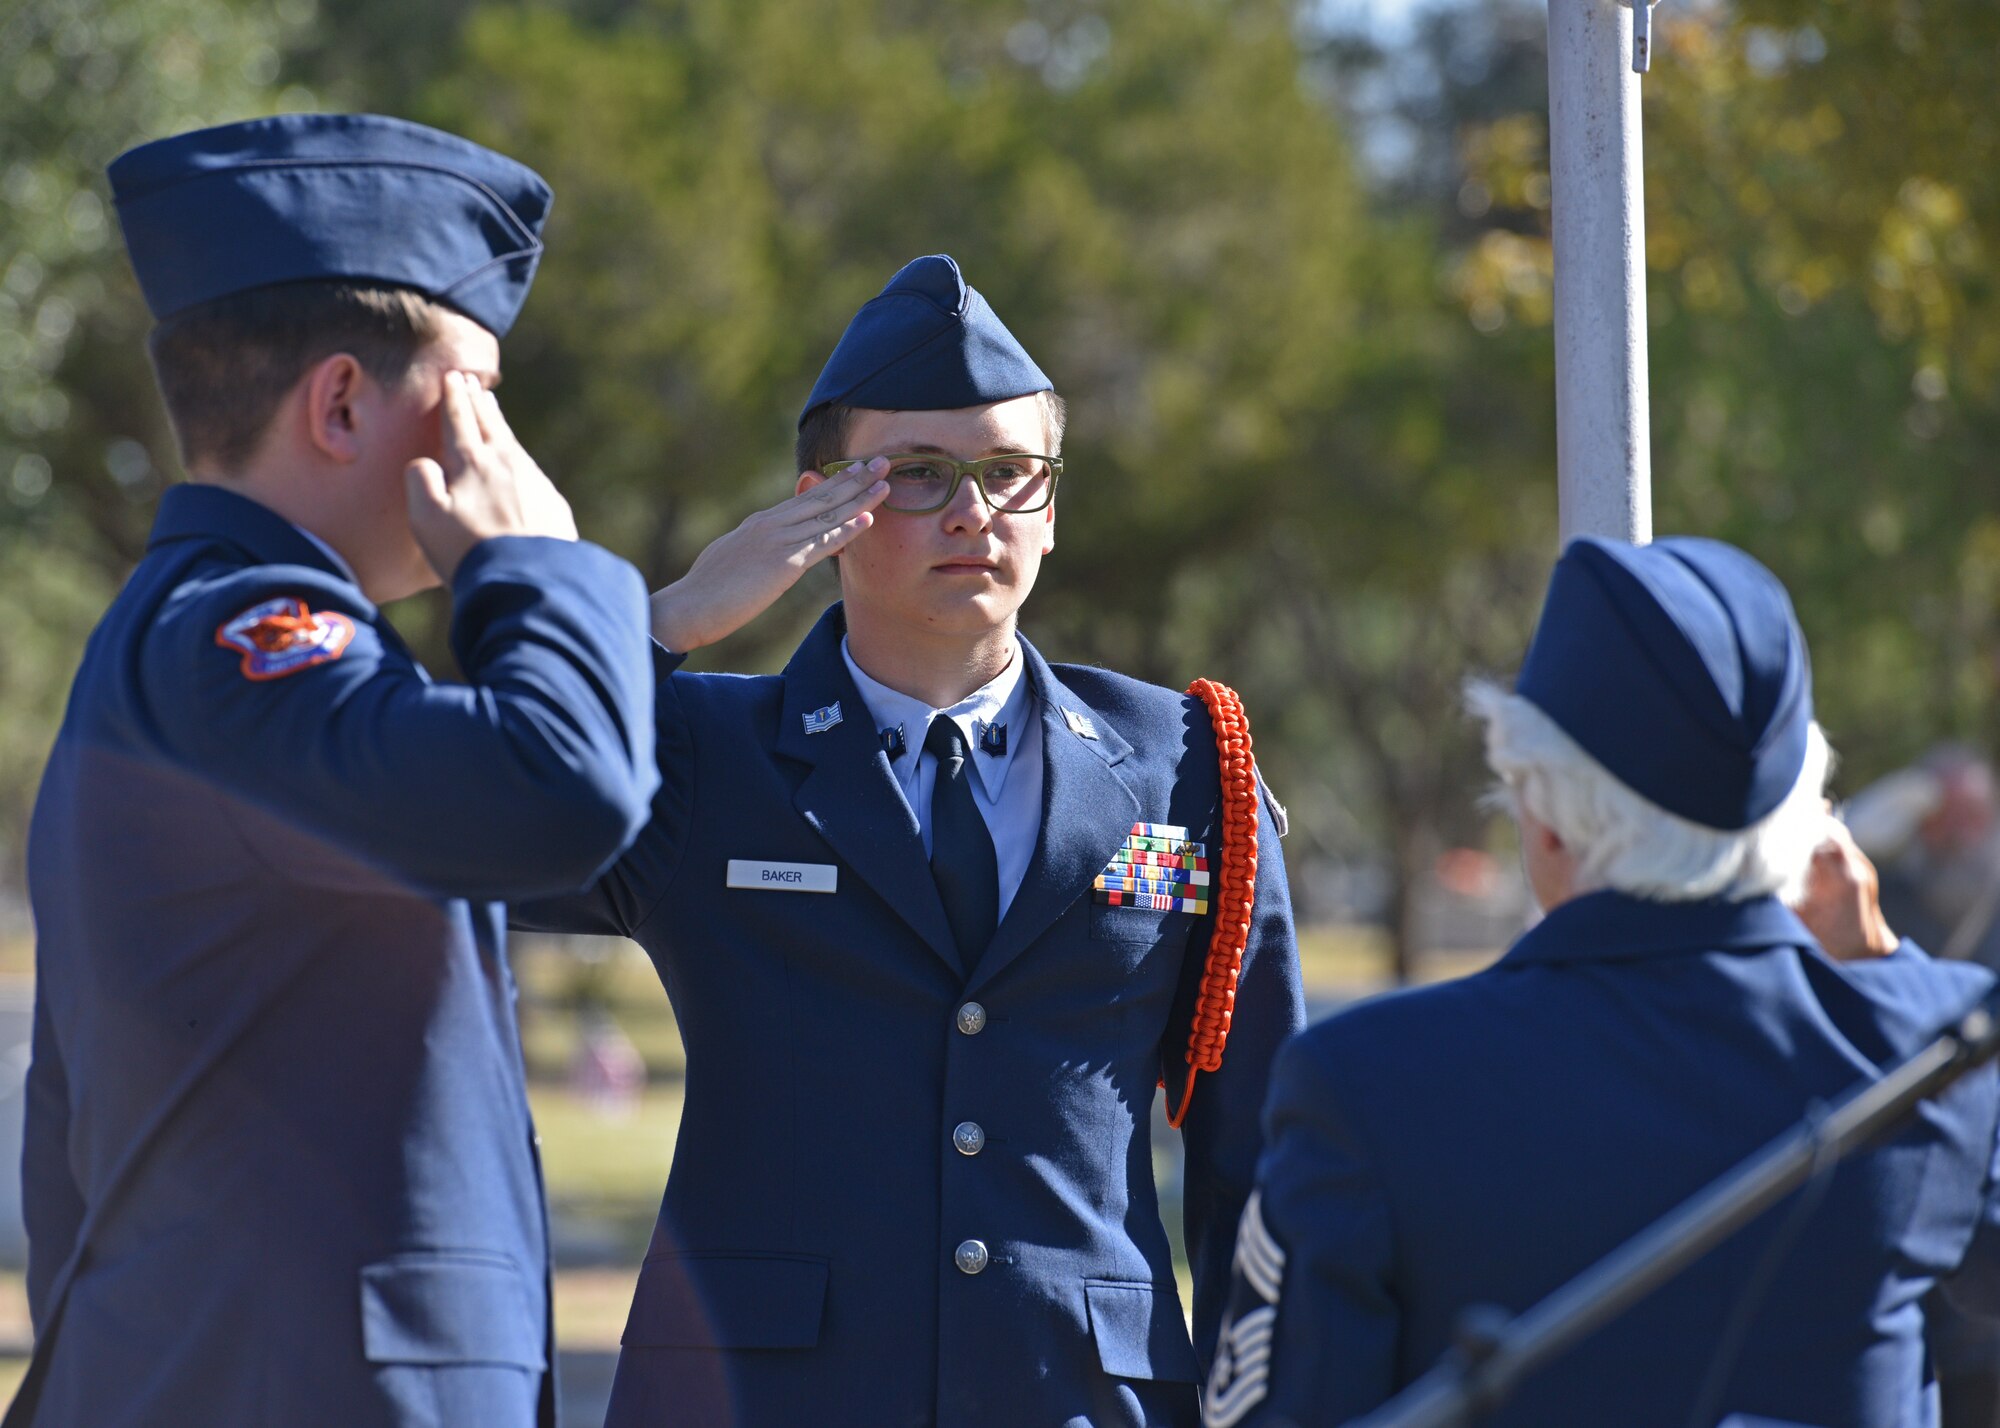 Members of Central High School Junior Reserve Officer Training Corps Color Guard salute during the Veteran’s Day ceremony at the Fairmount Cemetery in San Angelo, Texas, Nov. 11. ROTC is offered at more than 1,100 colleges and universities across the country. (U.S. Air Force photo by Senior Airman Ashley Thrash)